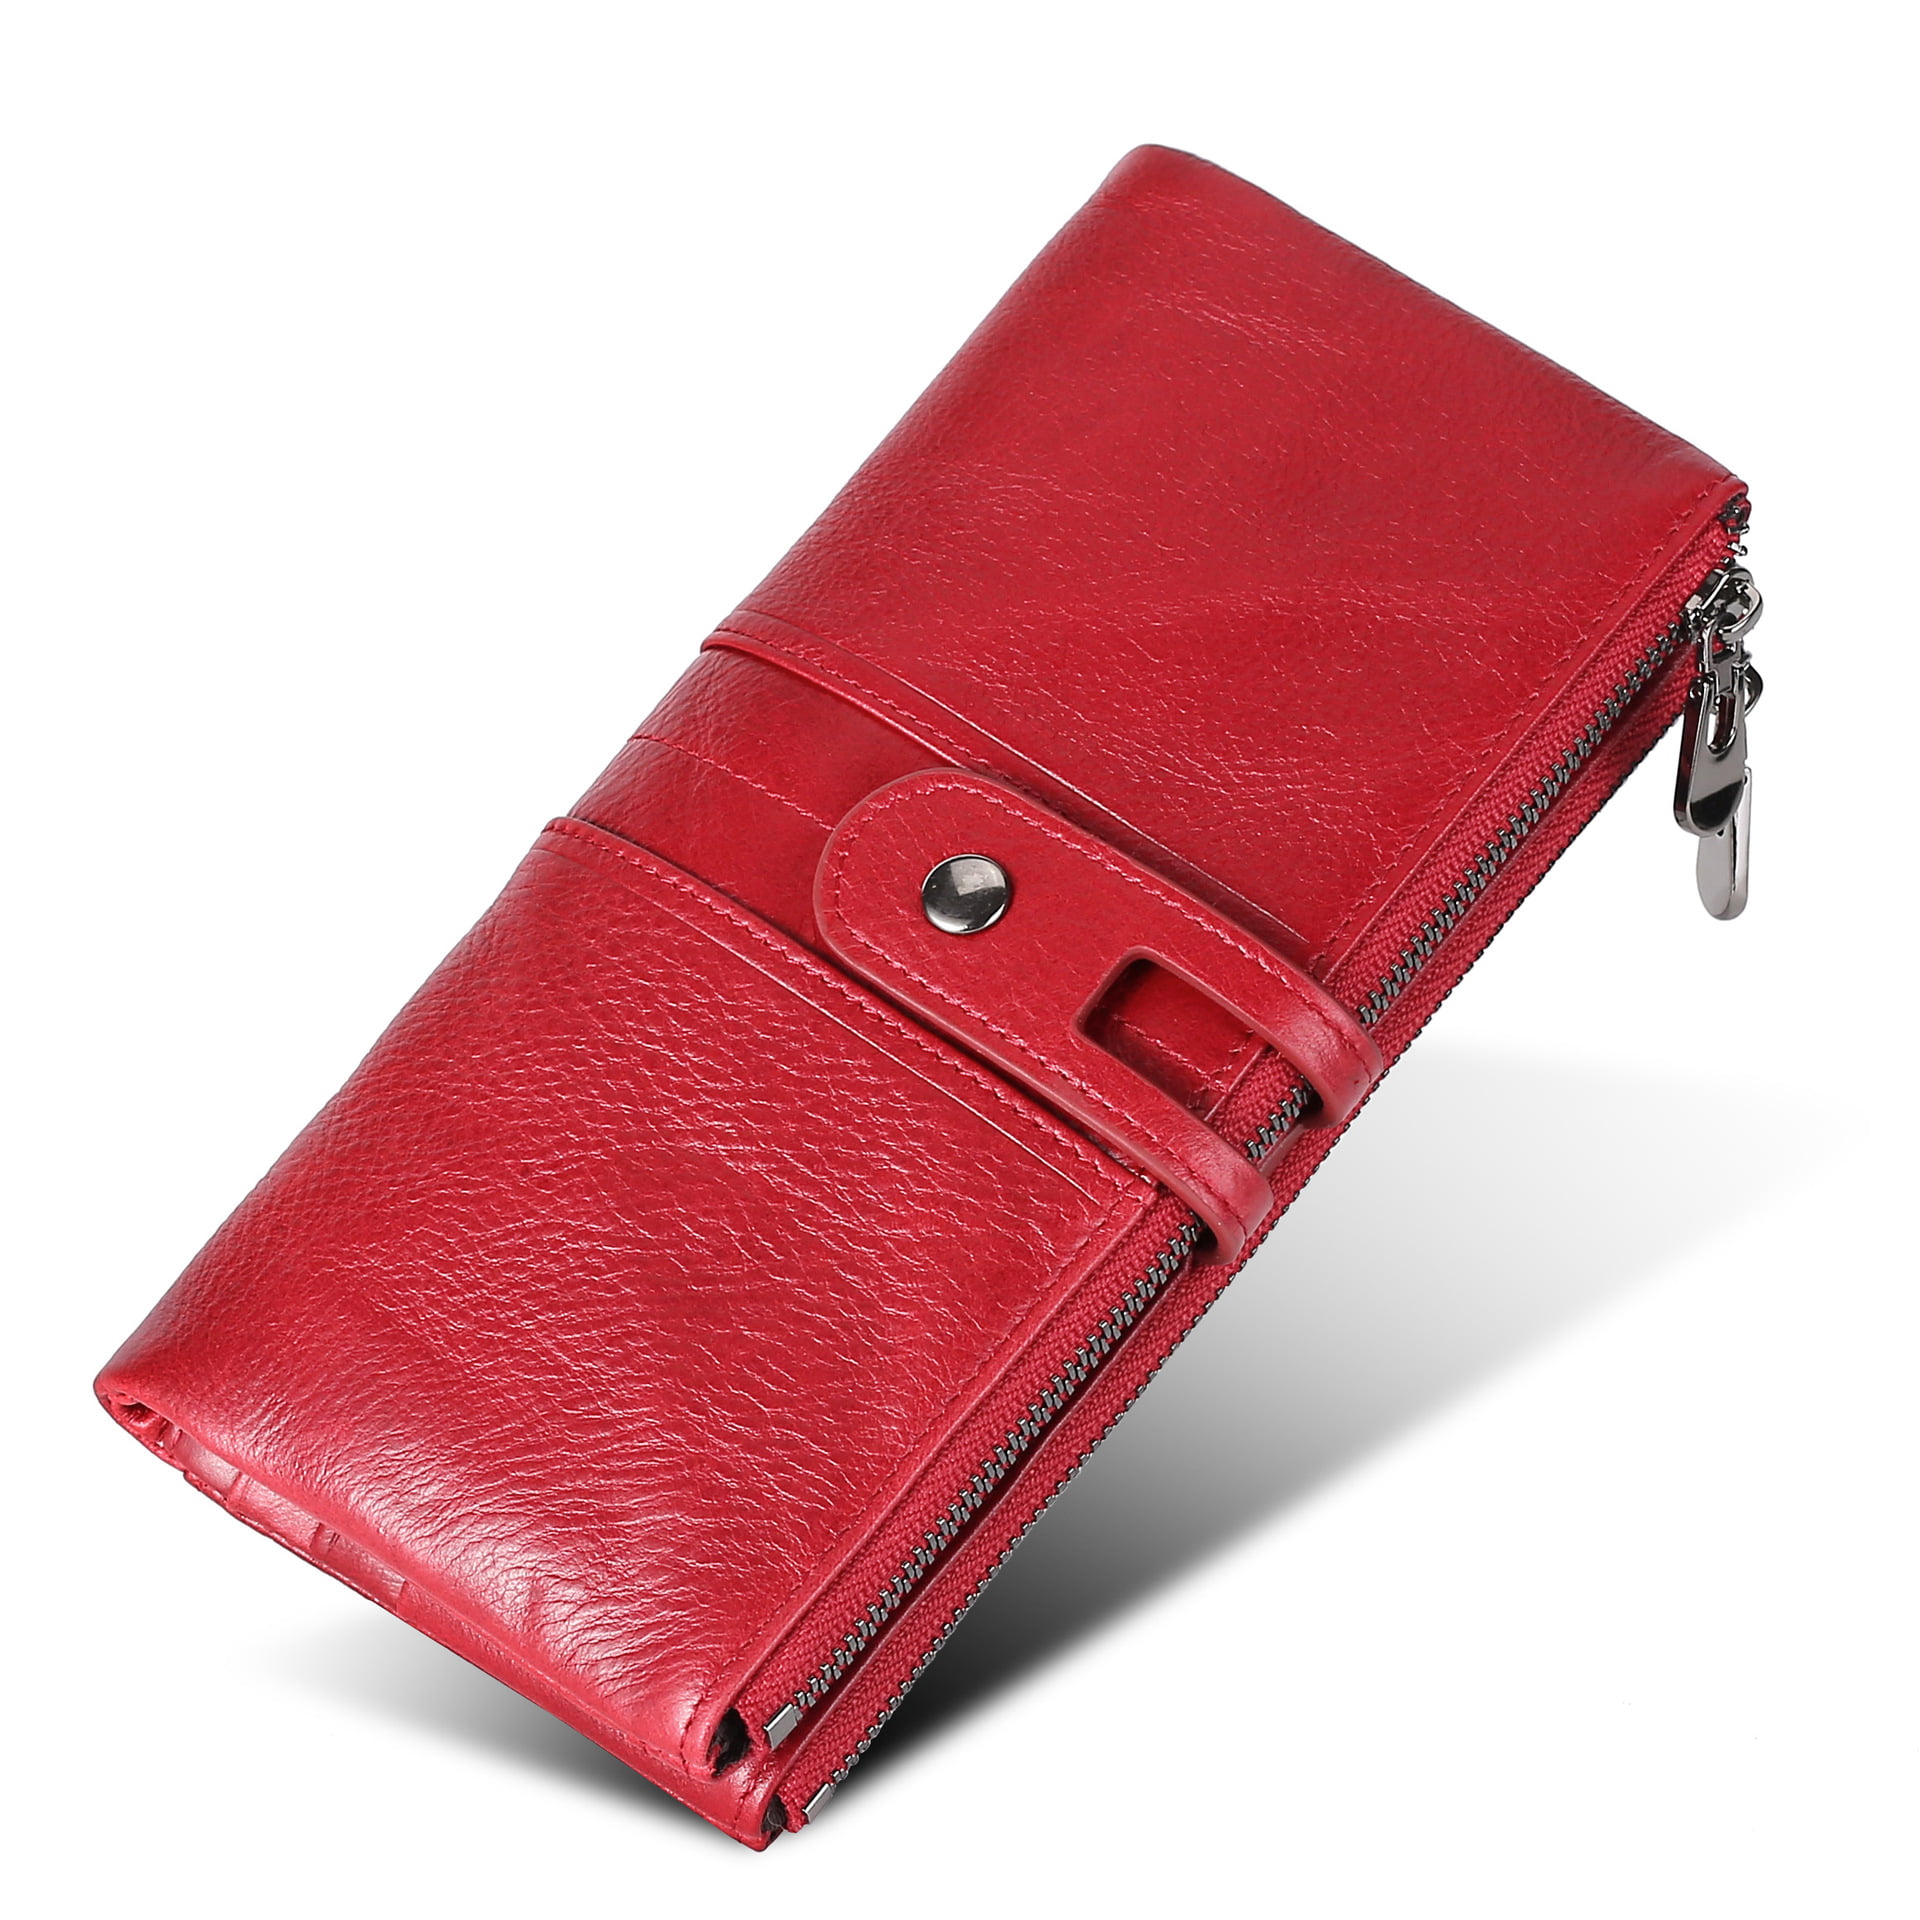 Contact'S Long Wallet Women Genuine Leather Large Capacity Ladies Card  Phone Wallets Red Coin Purses RFID Blocking Clutch